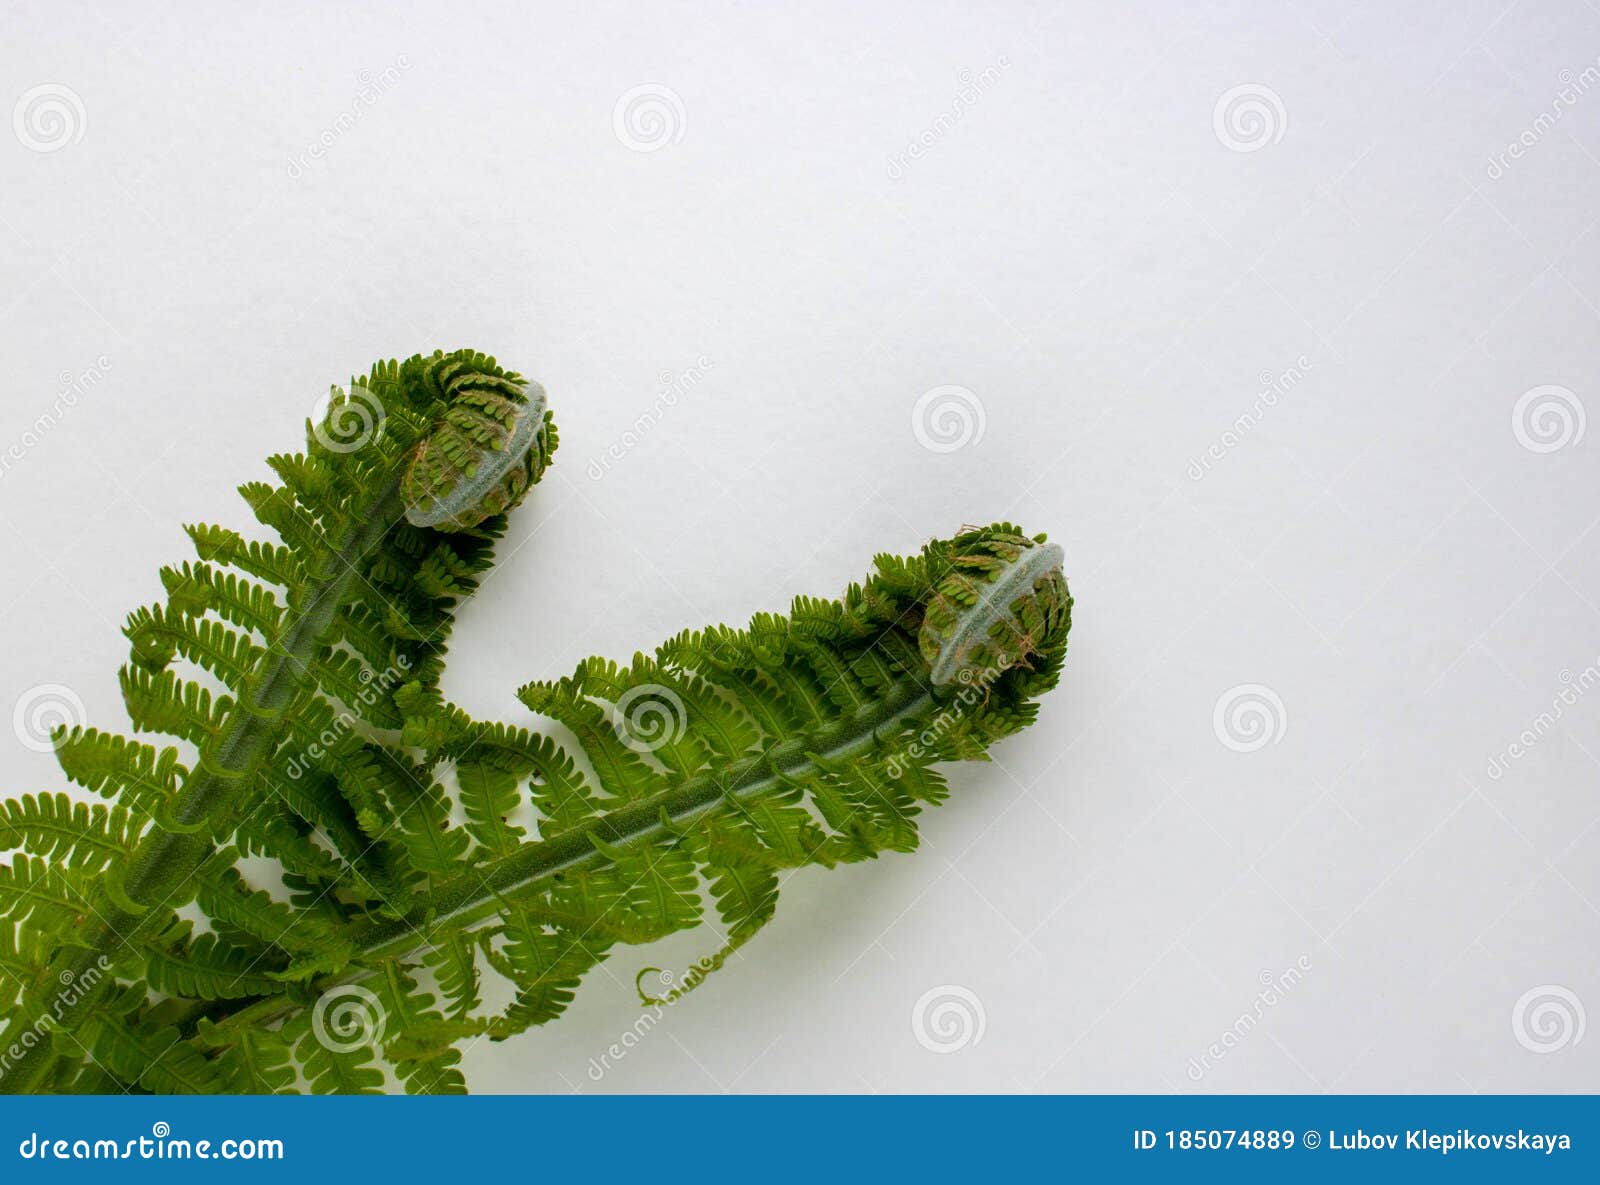 Shuttlecock Fern Matteuccia Spiral Fern Is A Genus Of Ferns With One Species Matteuccia Struthiopteris Common Names Ostrich Fern Stock Image Image Of Fern Circle 185074889